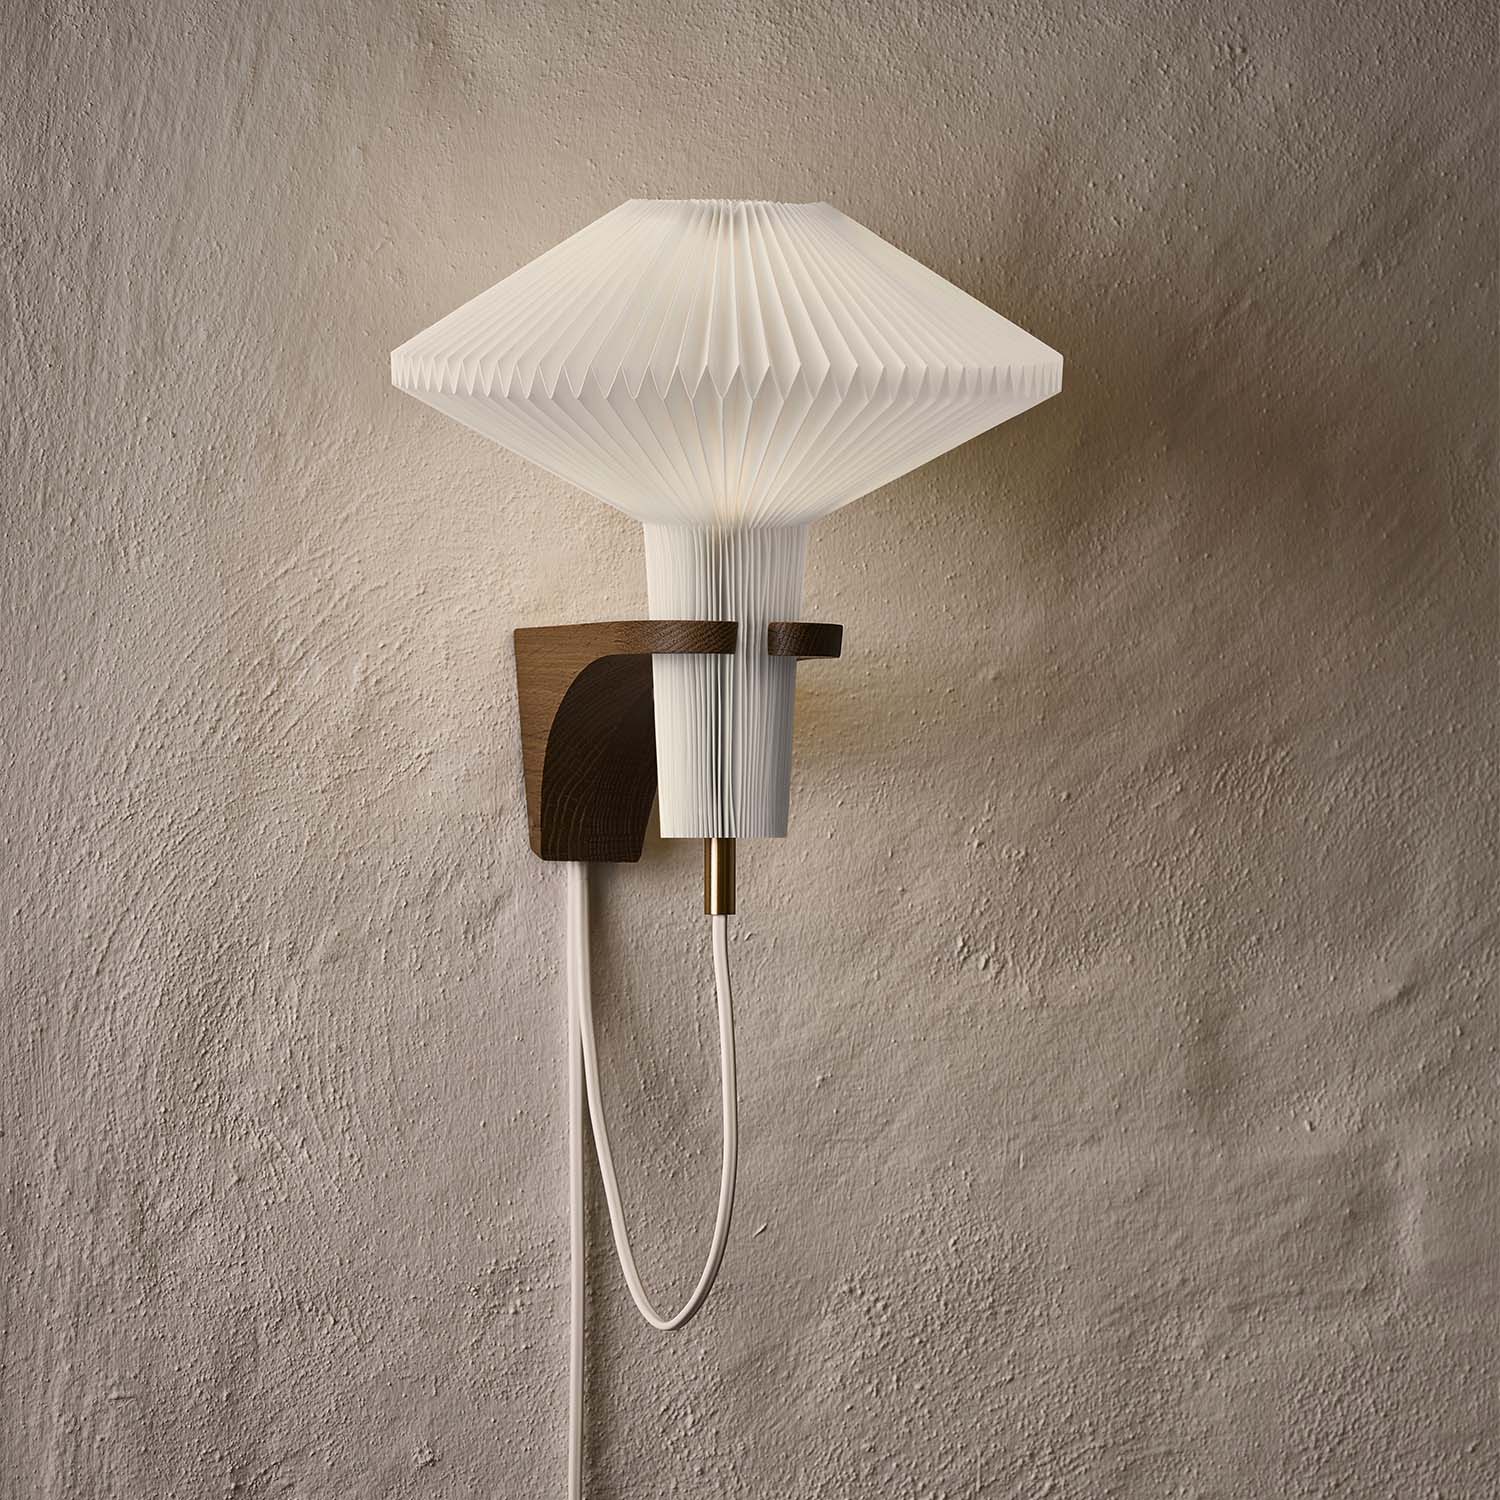 CLASSIC 204 - Wall light in wood and handmade pleated paper